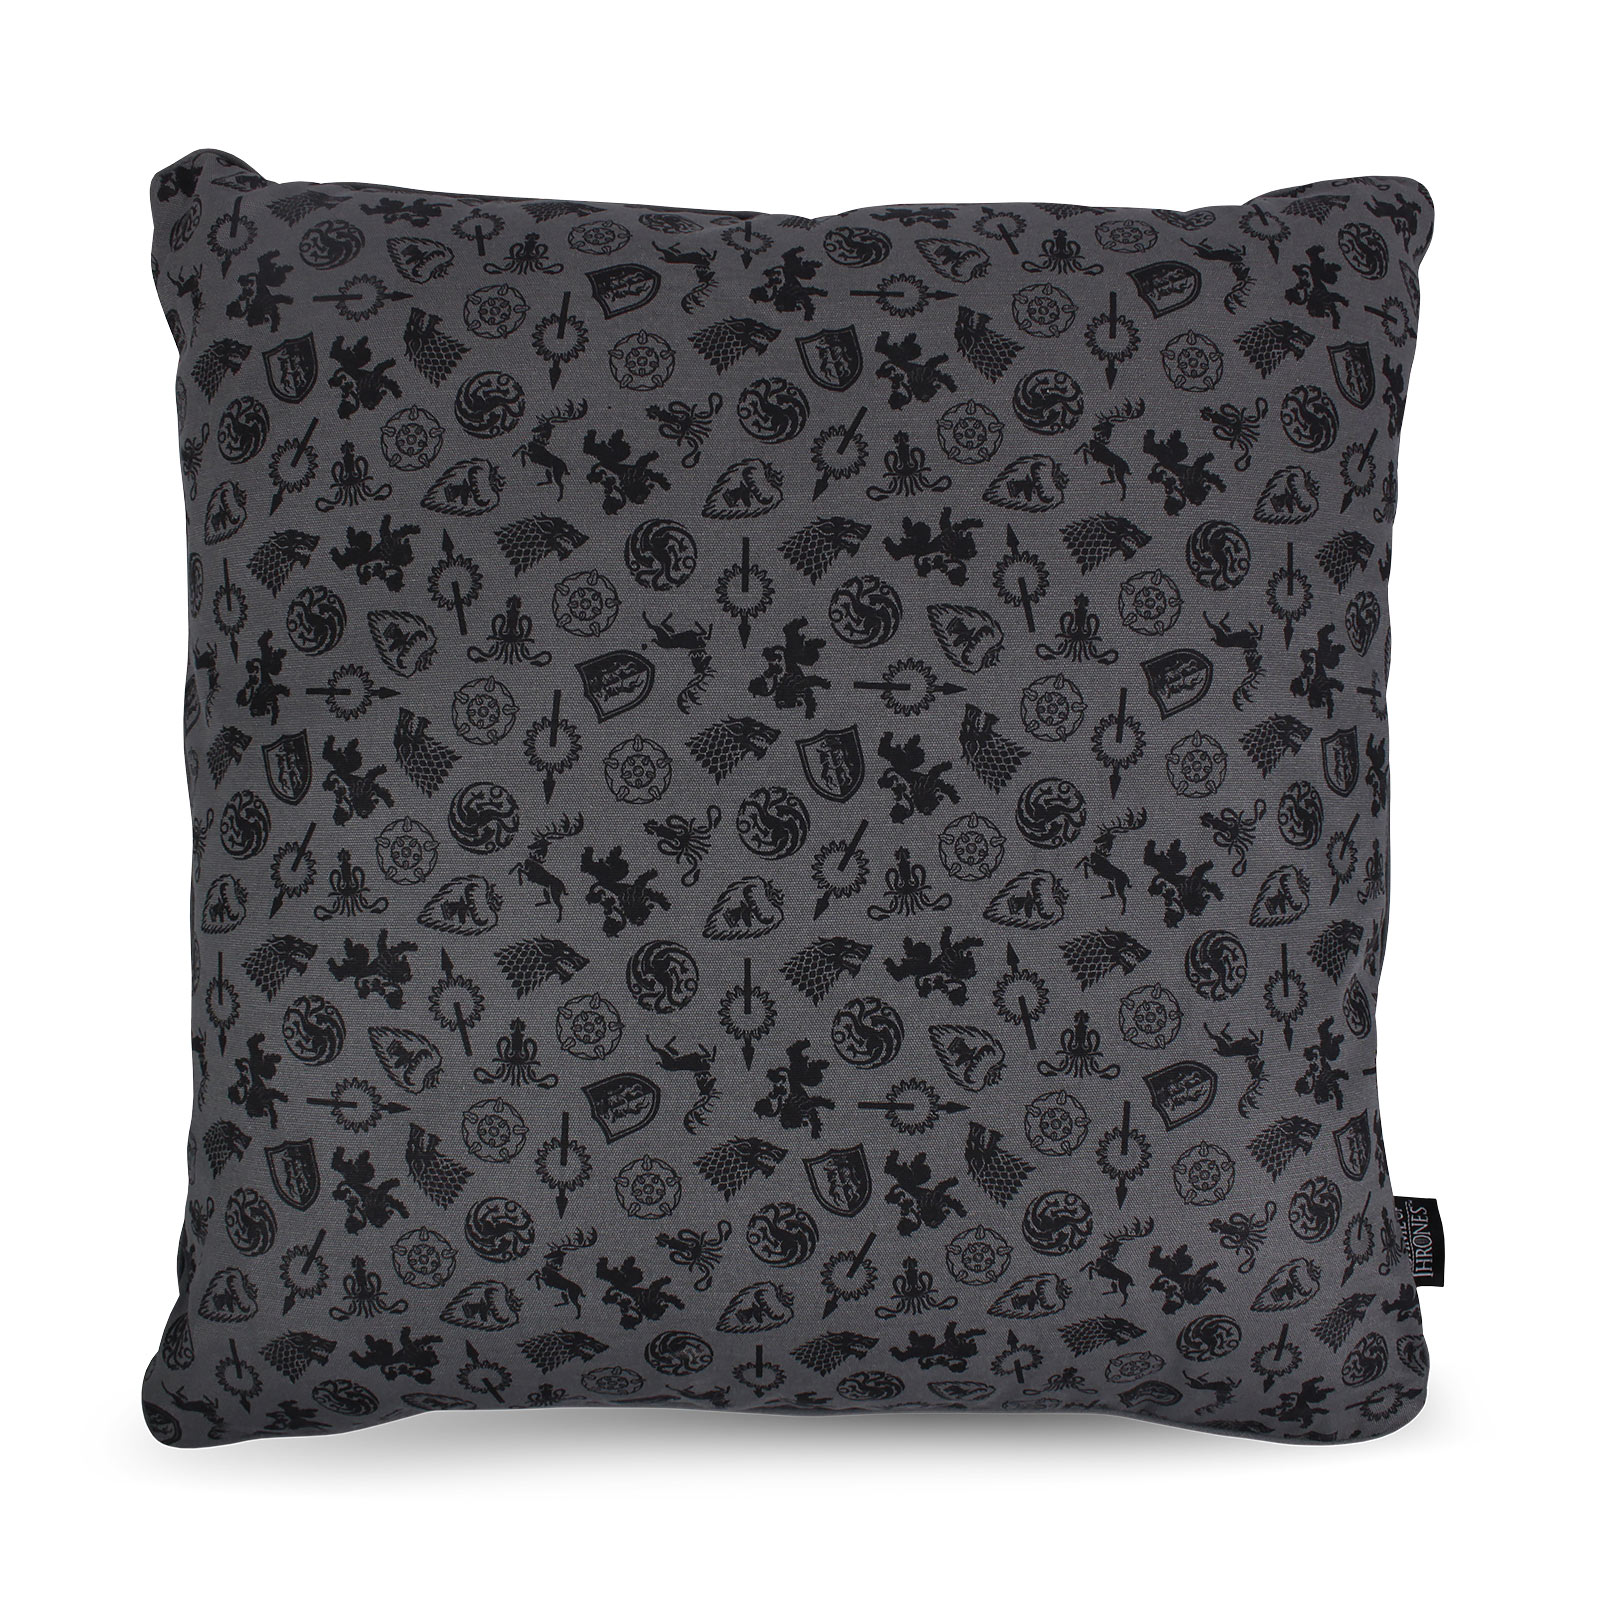 Game of Thrones - Stark Winter is Coming Pillow